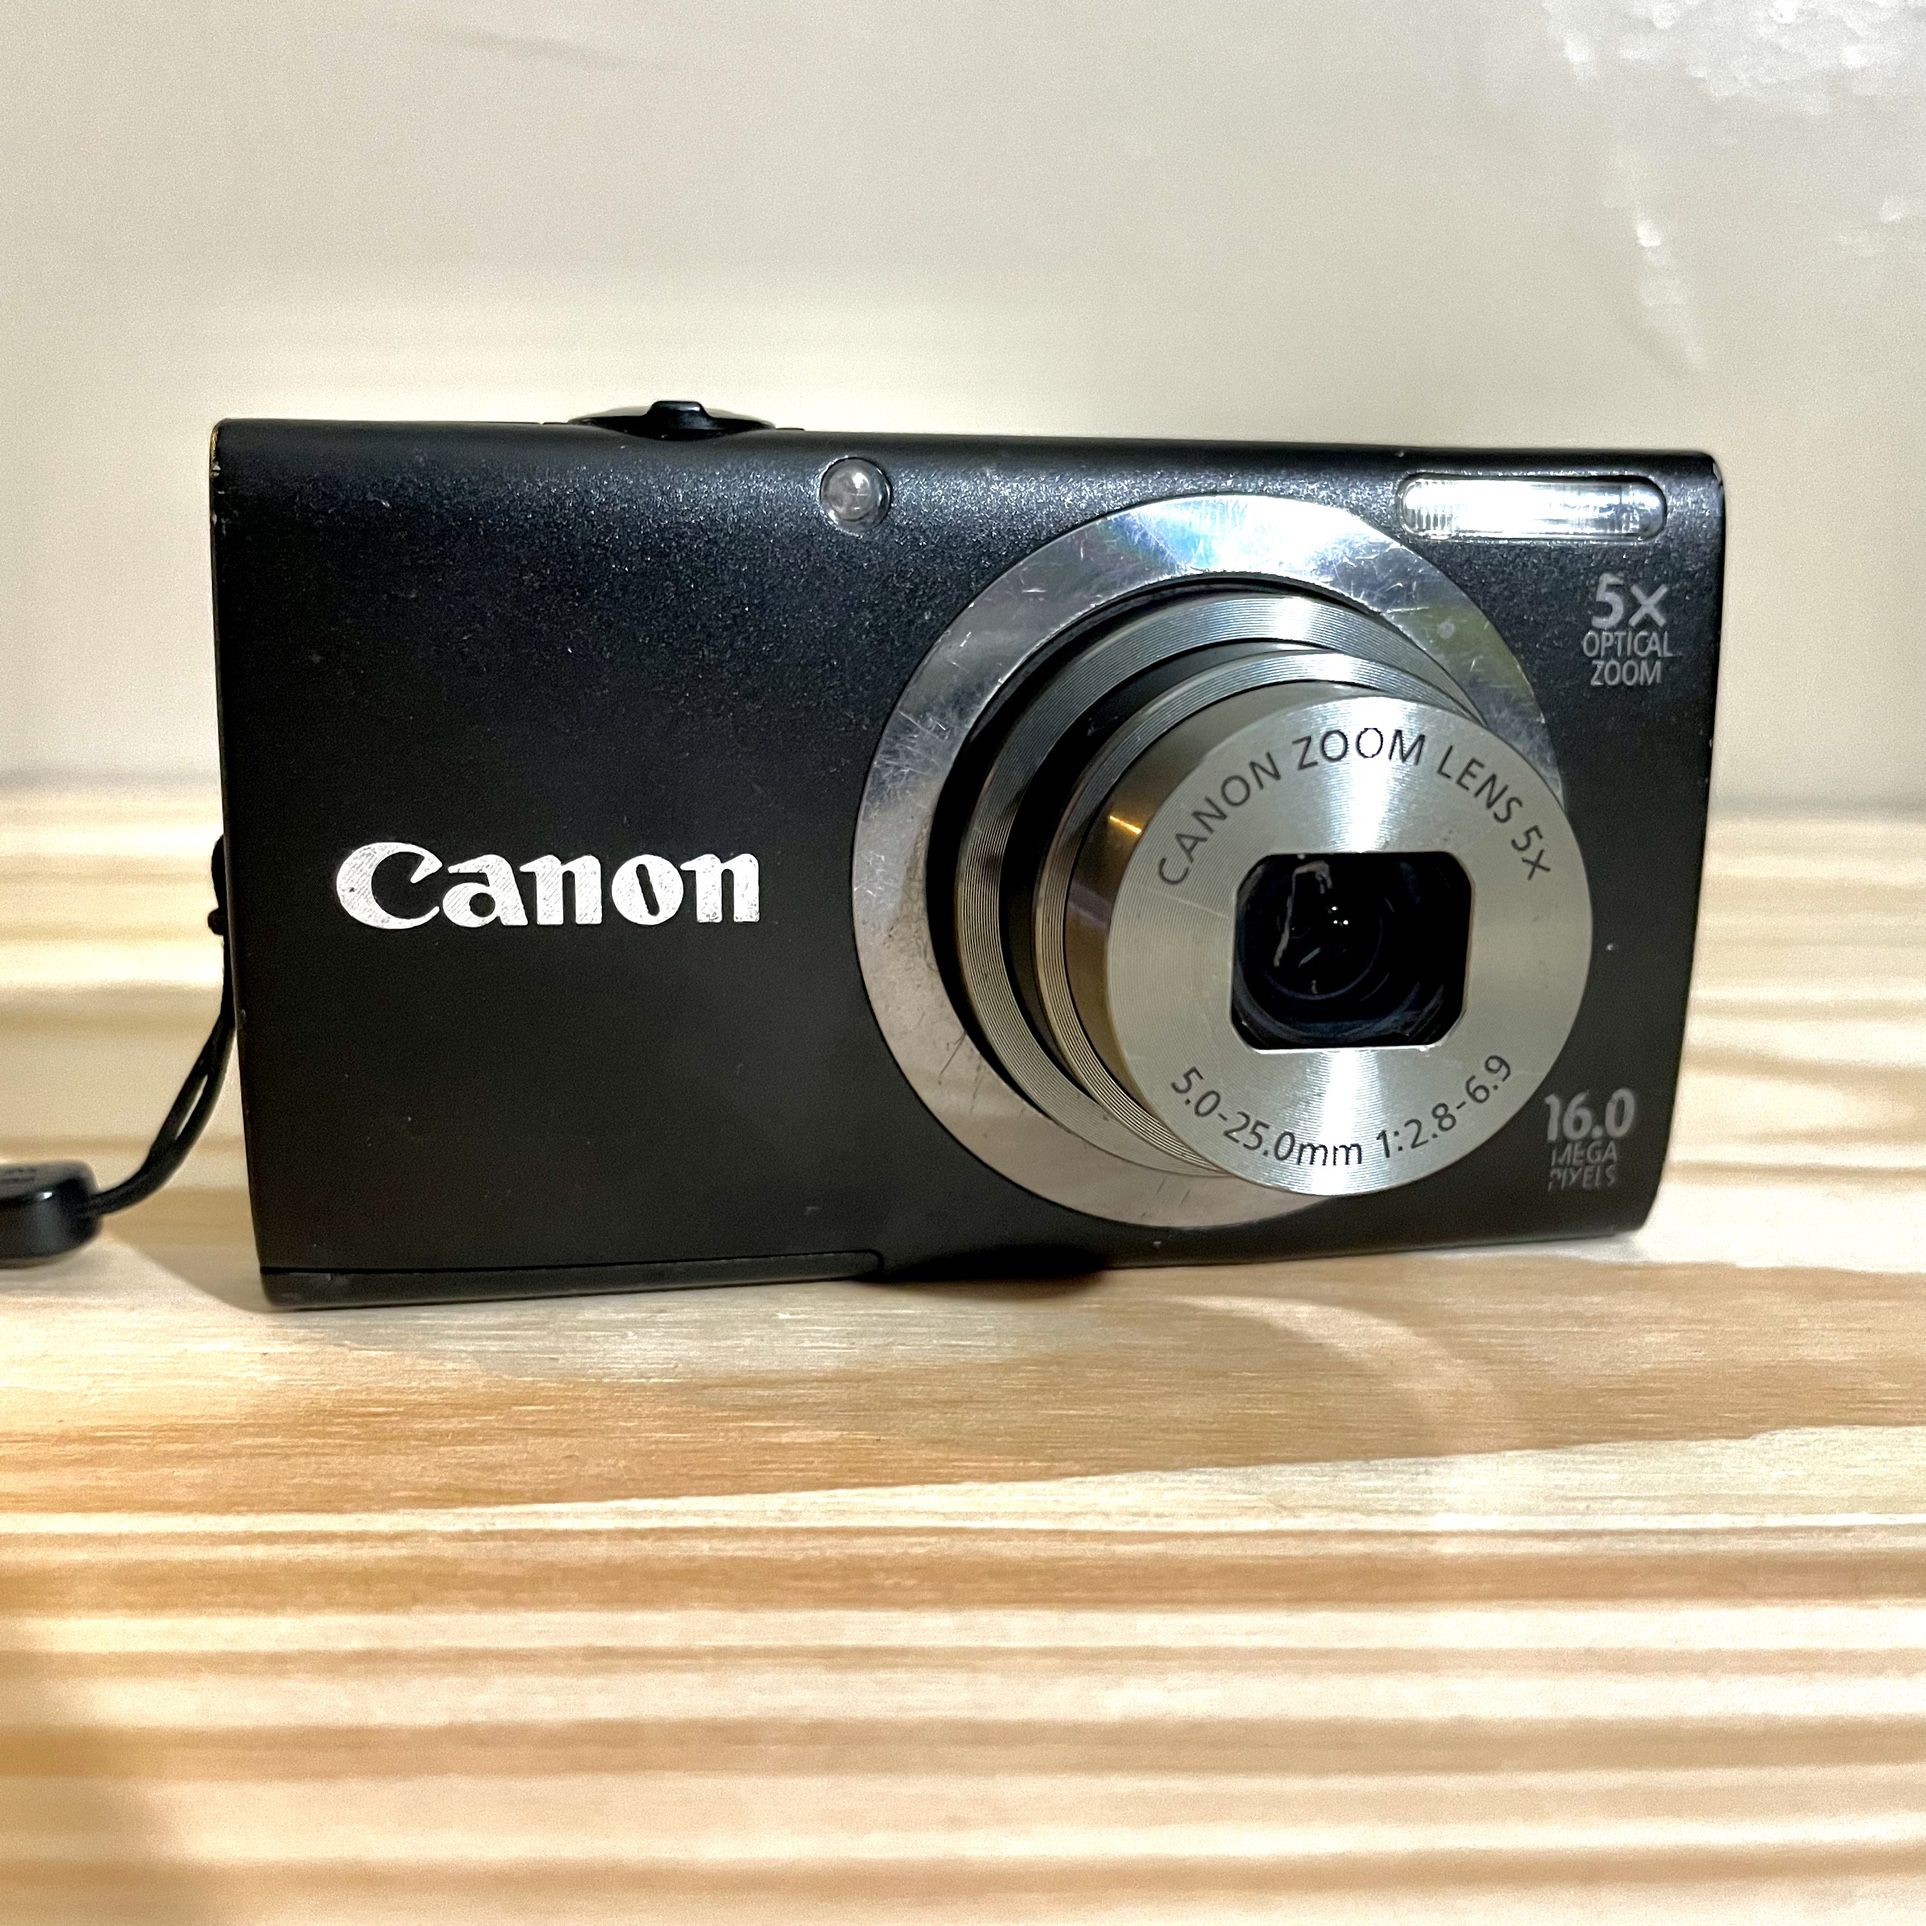 Canon PowerShot A2300 16.0 MP Digital Camera with 5x Optical Zoom (Silver)